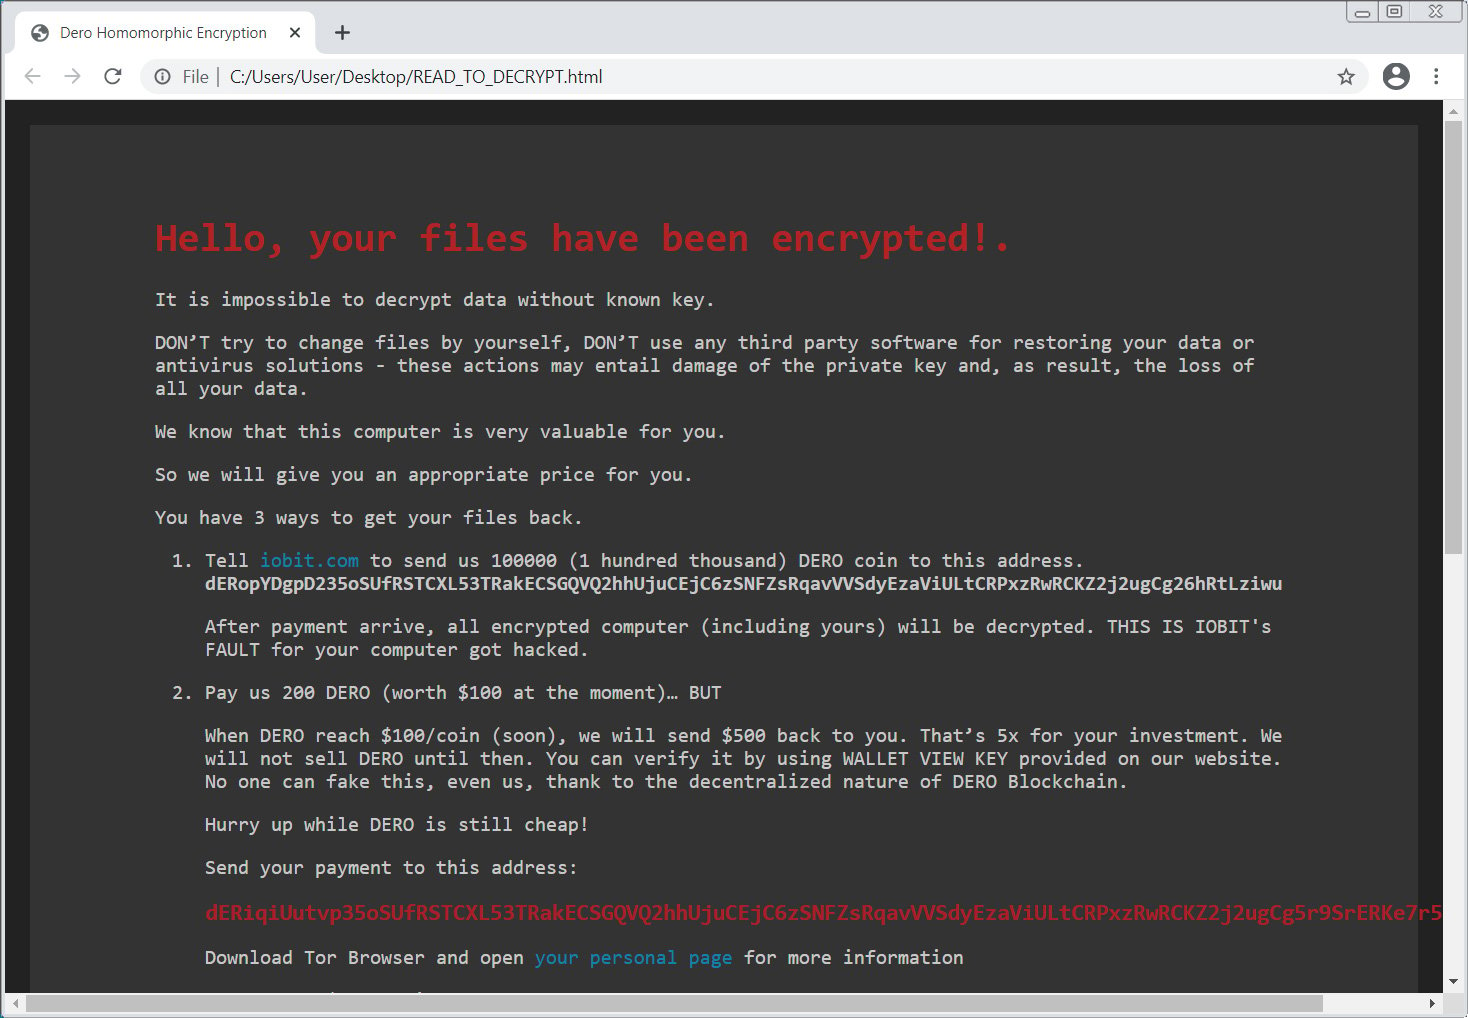 DeroHE ransomware ransom note